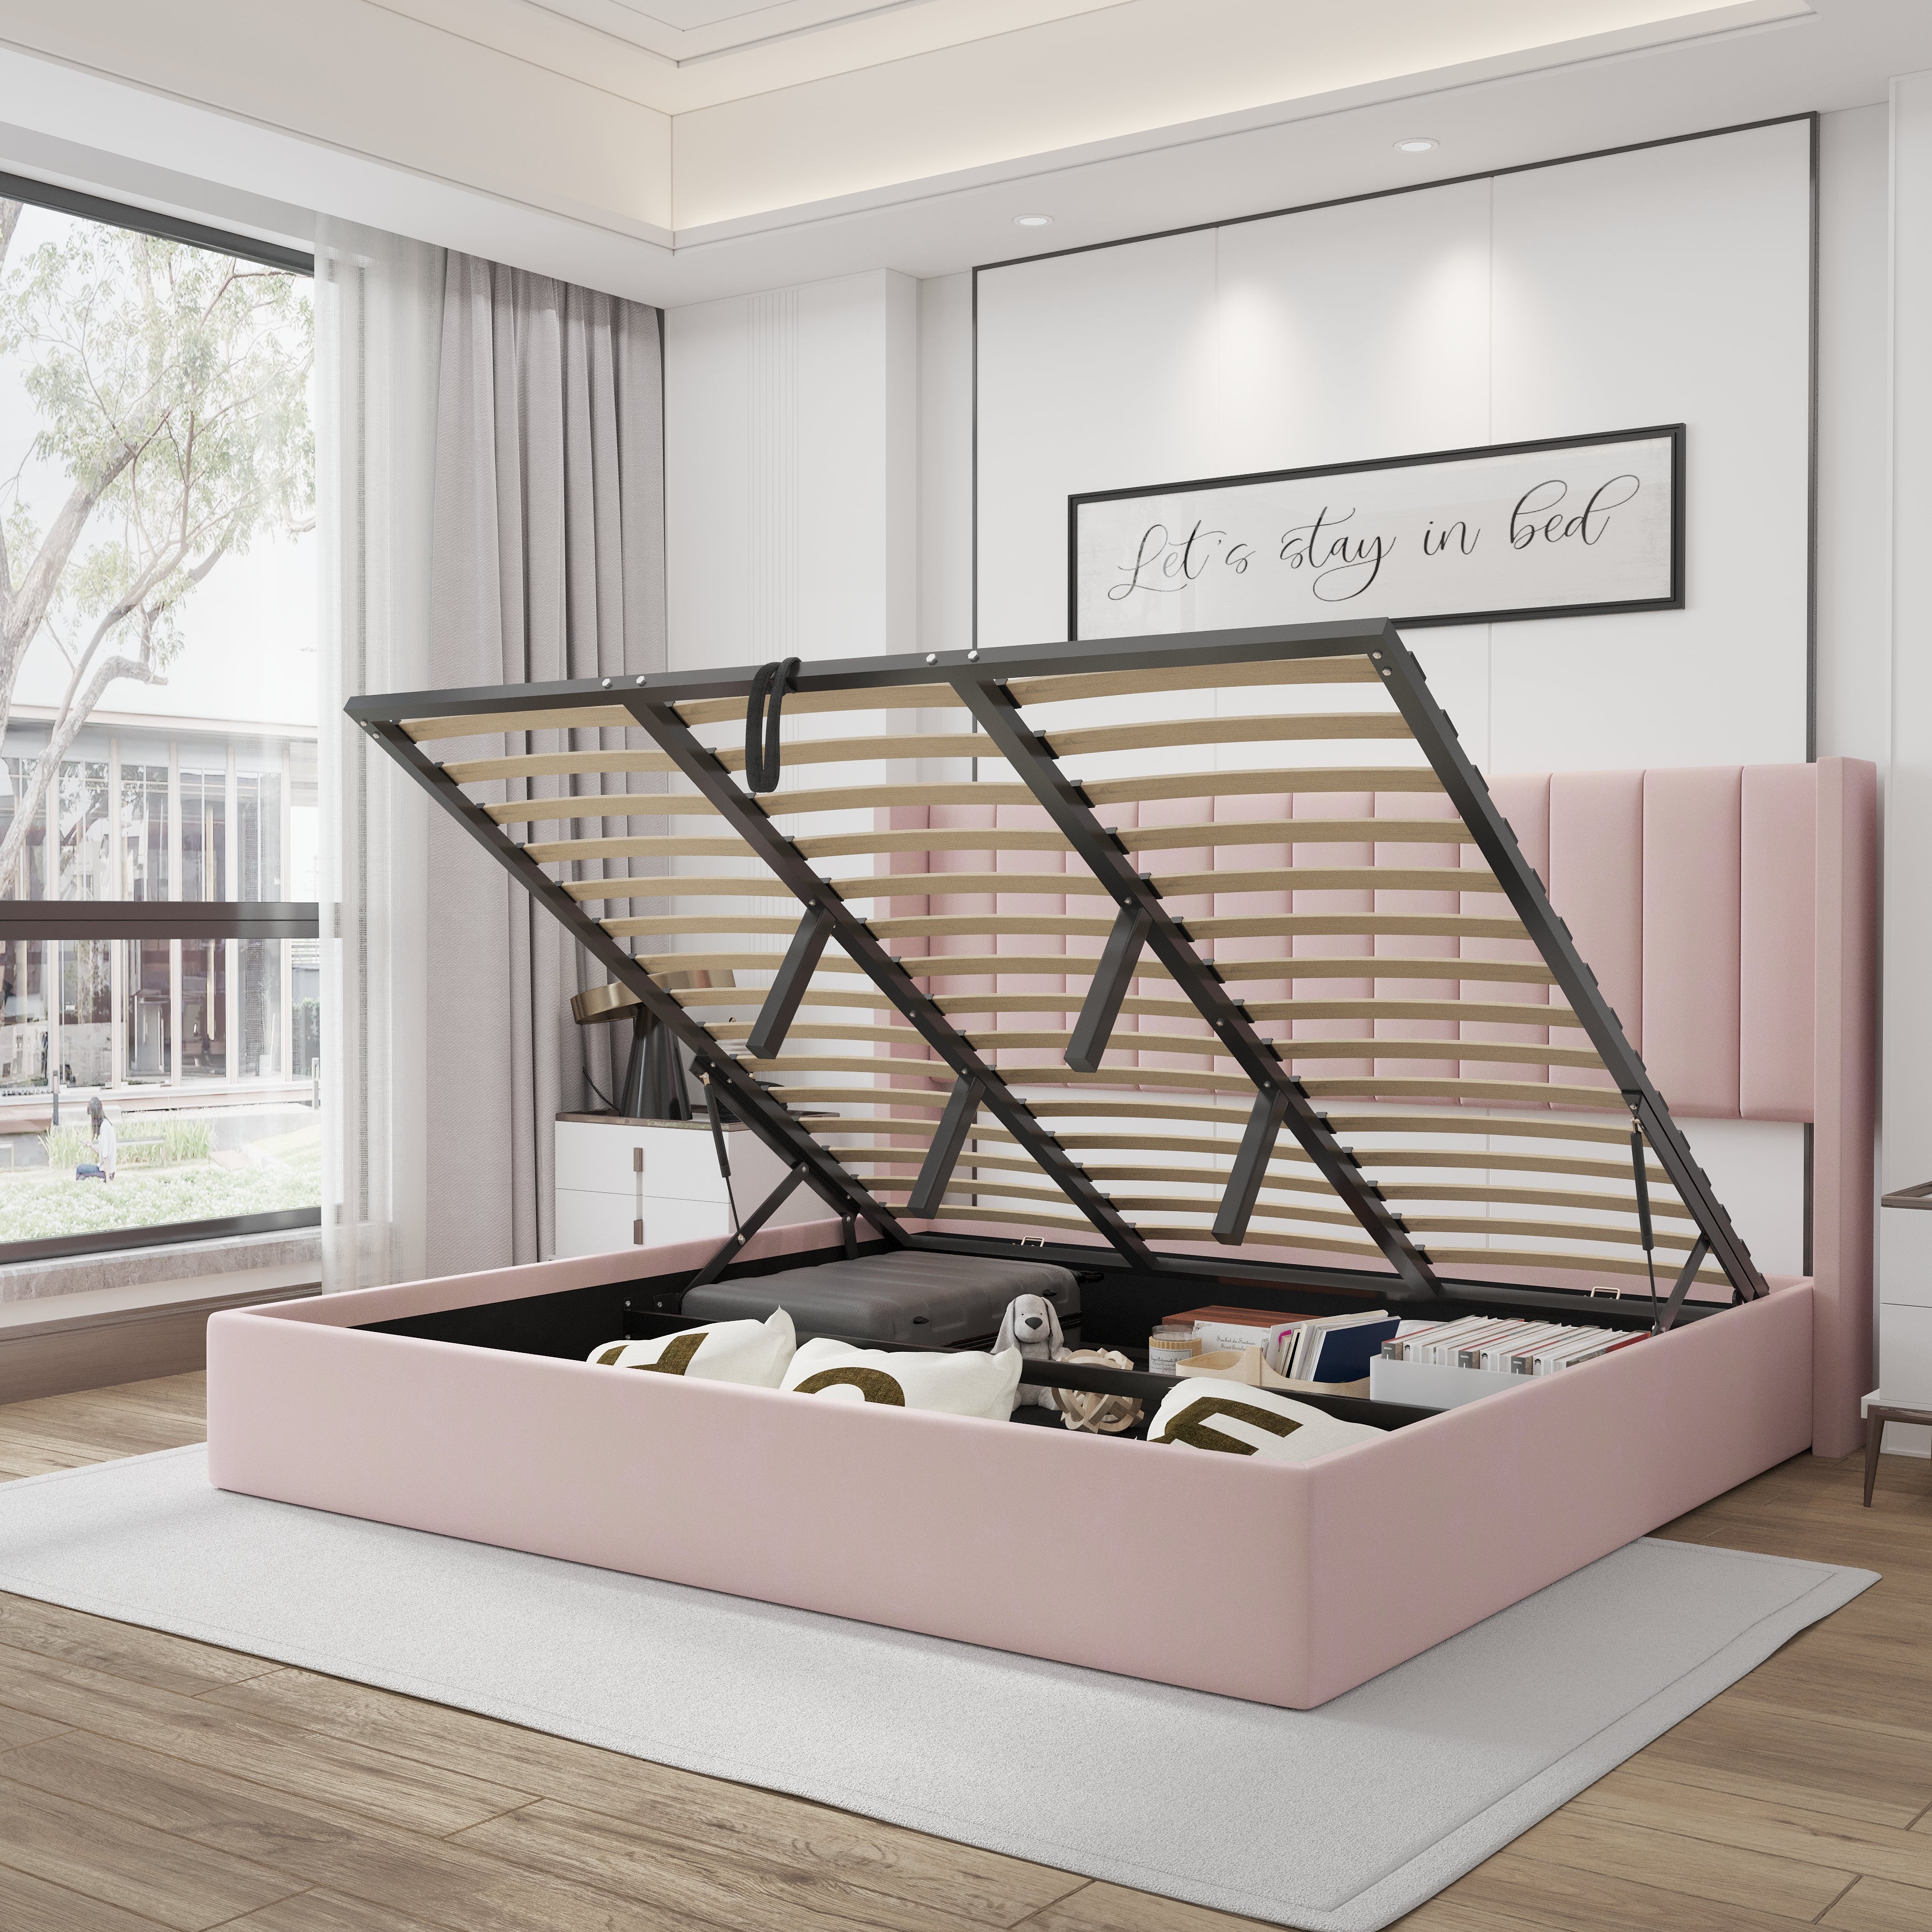 Velets Oliver Contemporary Mid-Century Soft Padded Upholstered Platform Storage Bed with Hydraulic Gas Lift Storage - Solid Wood Frame, Wood Slat System & Smart Hydraulic Under-Bed Storage - Pink